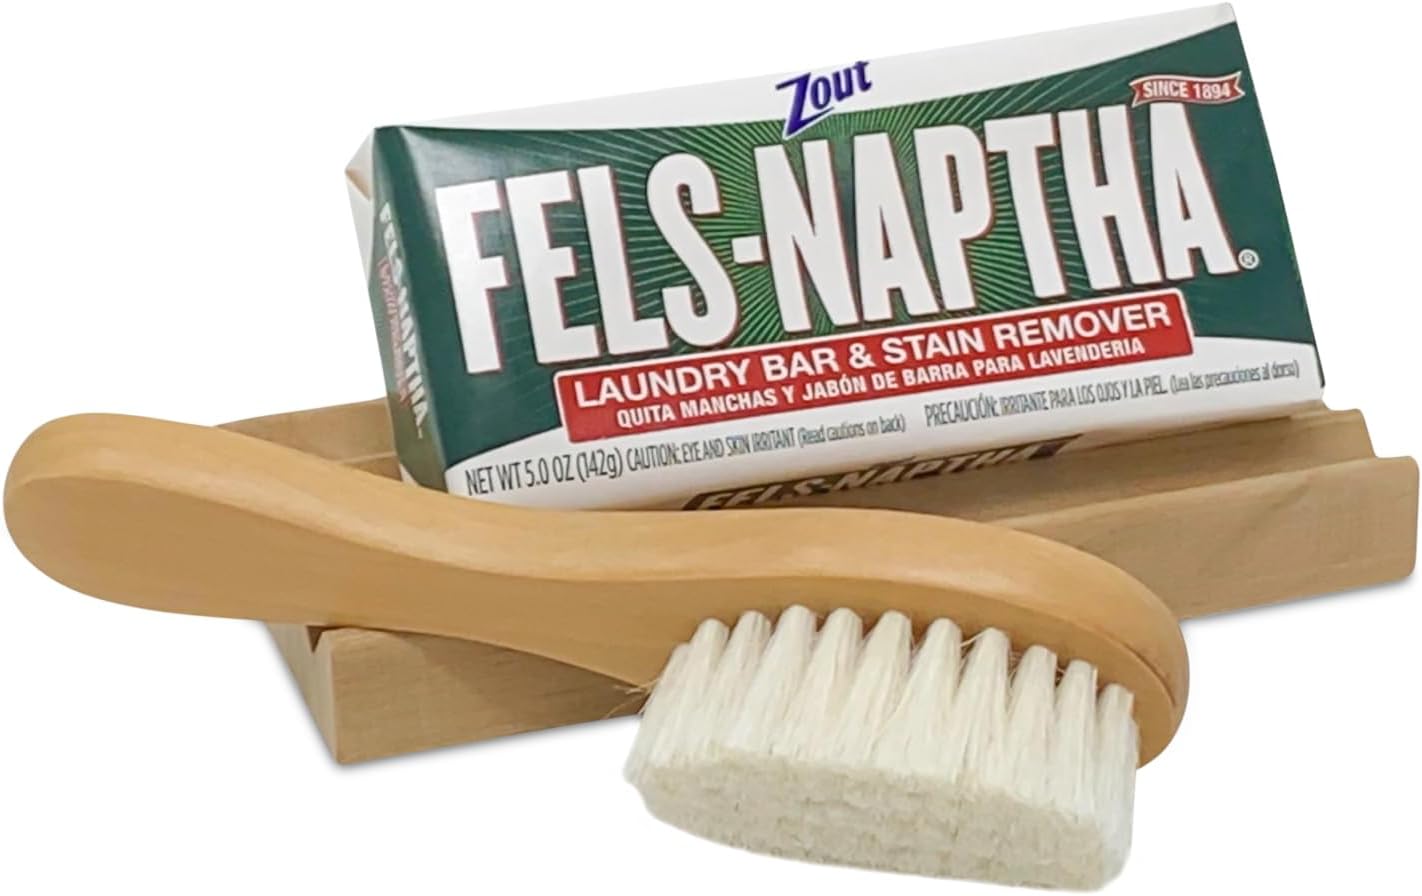 Fels Naptha Laundry Detergent Bar - 5 Ounce Fels Naptha Laundry Bar Soap and Stain Remover Bundle. Get the Ultimate Accessory to your Fels Naptha Soap Bars. (Fabric Safe Brush Bundle)